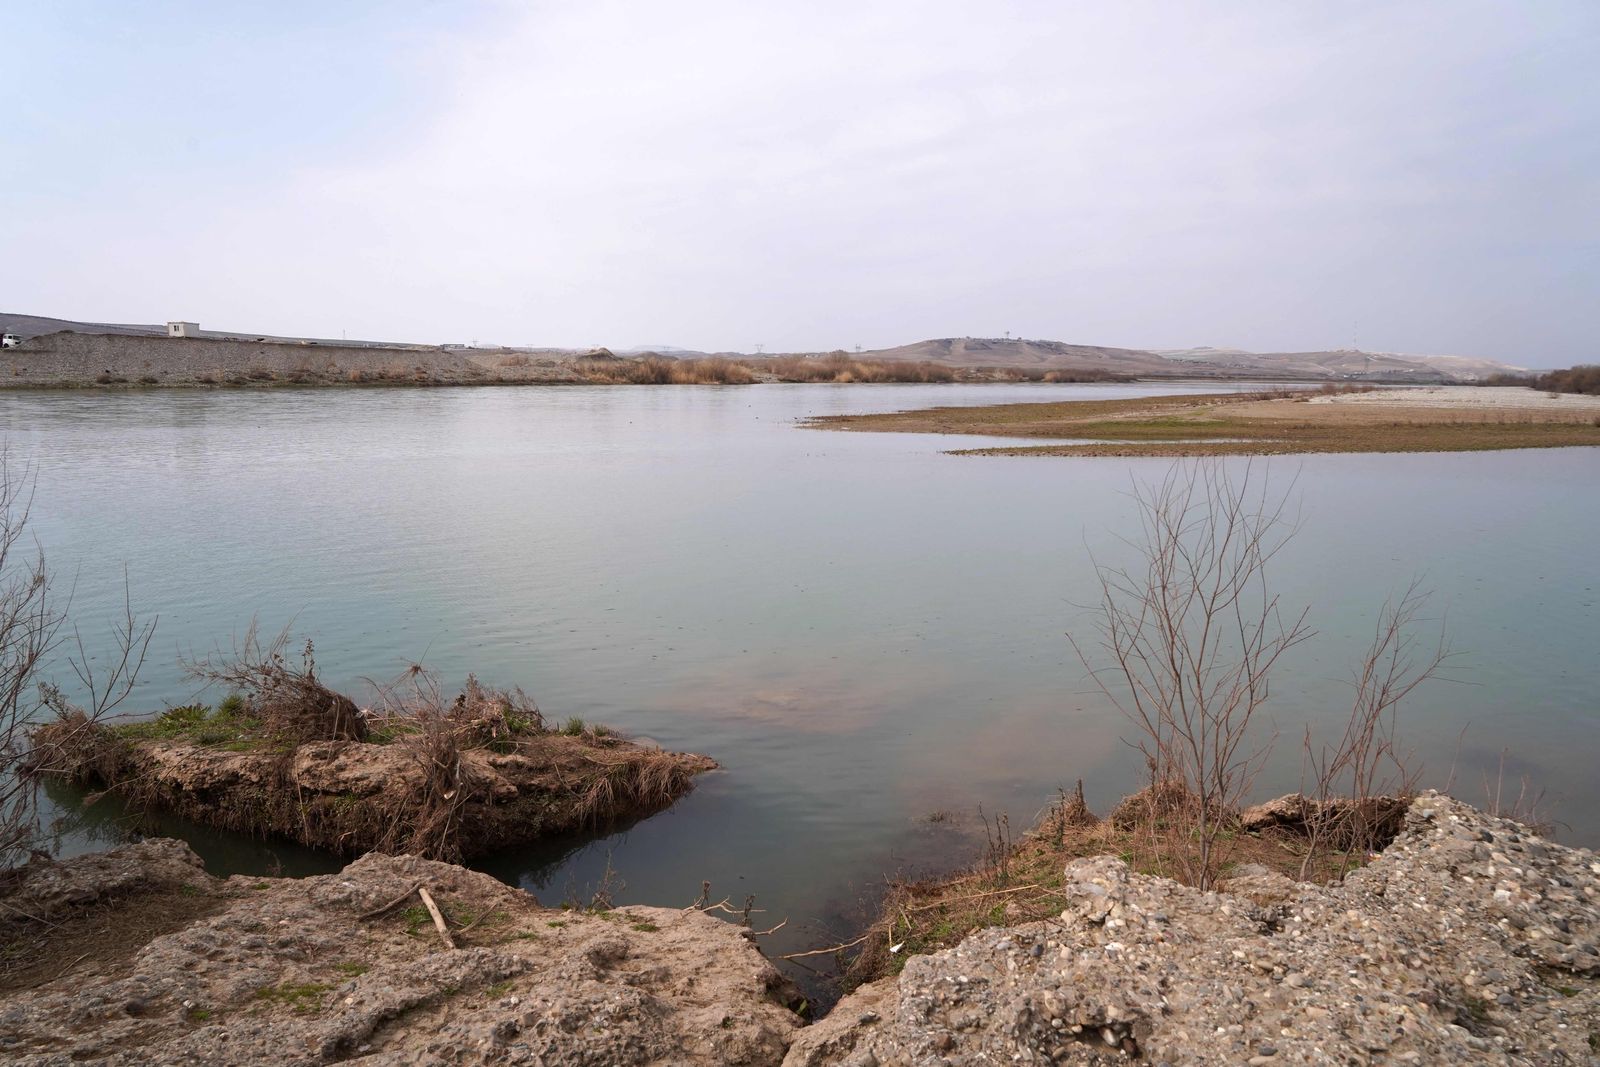 This picture shows a view of the Tigris river, in the village of Bajid Kandala, some 50km west of the northern Iraqi city of Dohuk, on February 18, 2022. - The Tigris is one of Iraq's two big rivers that gave birth to the ancient empires of Sumer and Babylonia and are said to have watered the biblical Garden of Eden. Today, it is dying.Human activity and climate change have choked the once mighty stream that, with its twin the Euphrates, brought to life the civilisations of Mesopotamia thousands of years ago. (Photo by Ismael ADNAN / AFP) - AFP